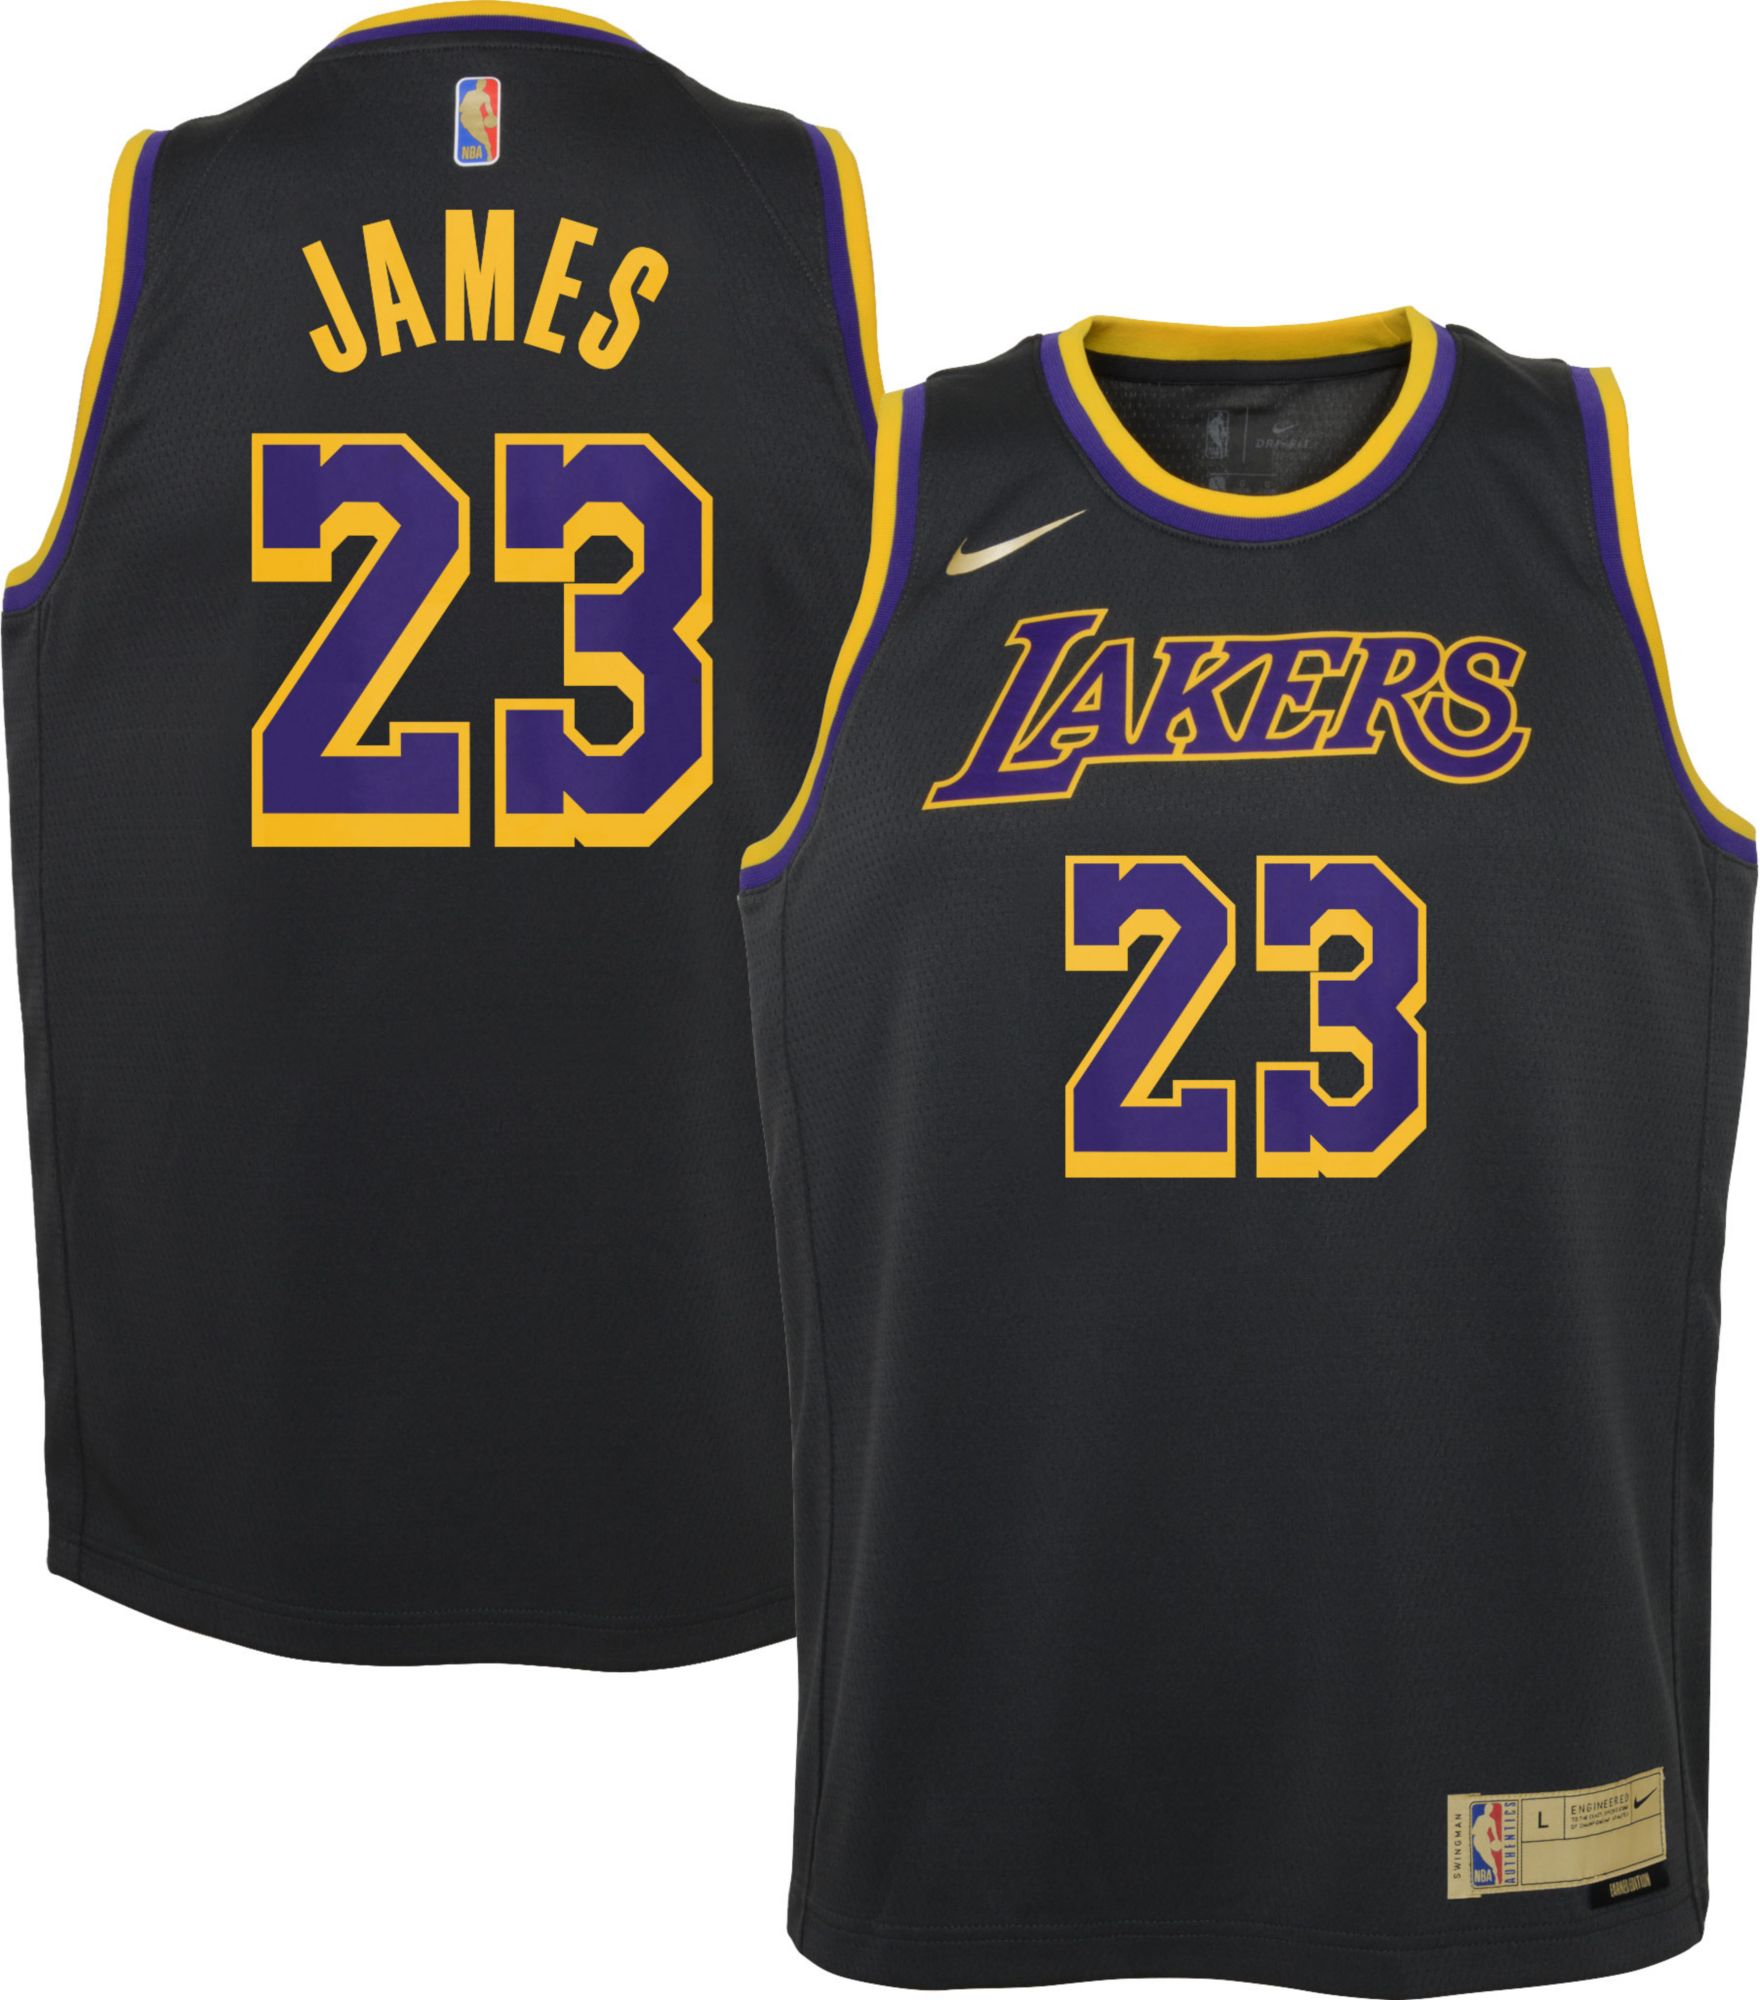 lebron james jersey cost